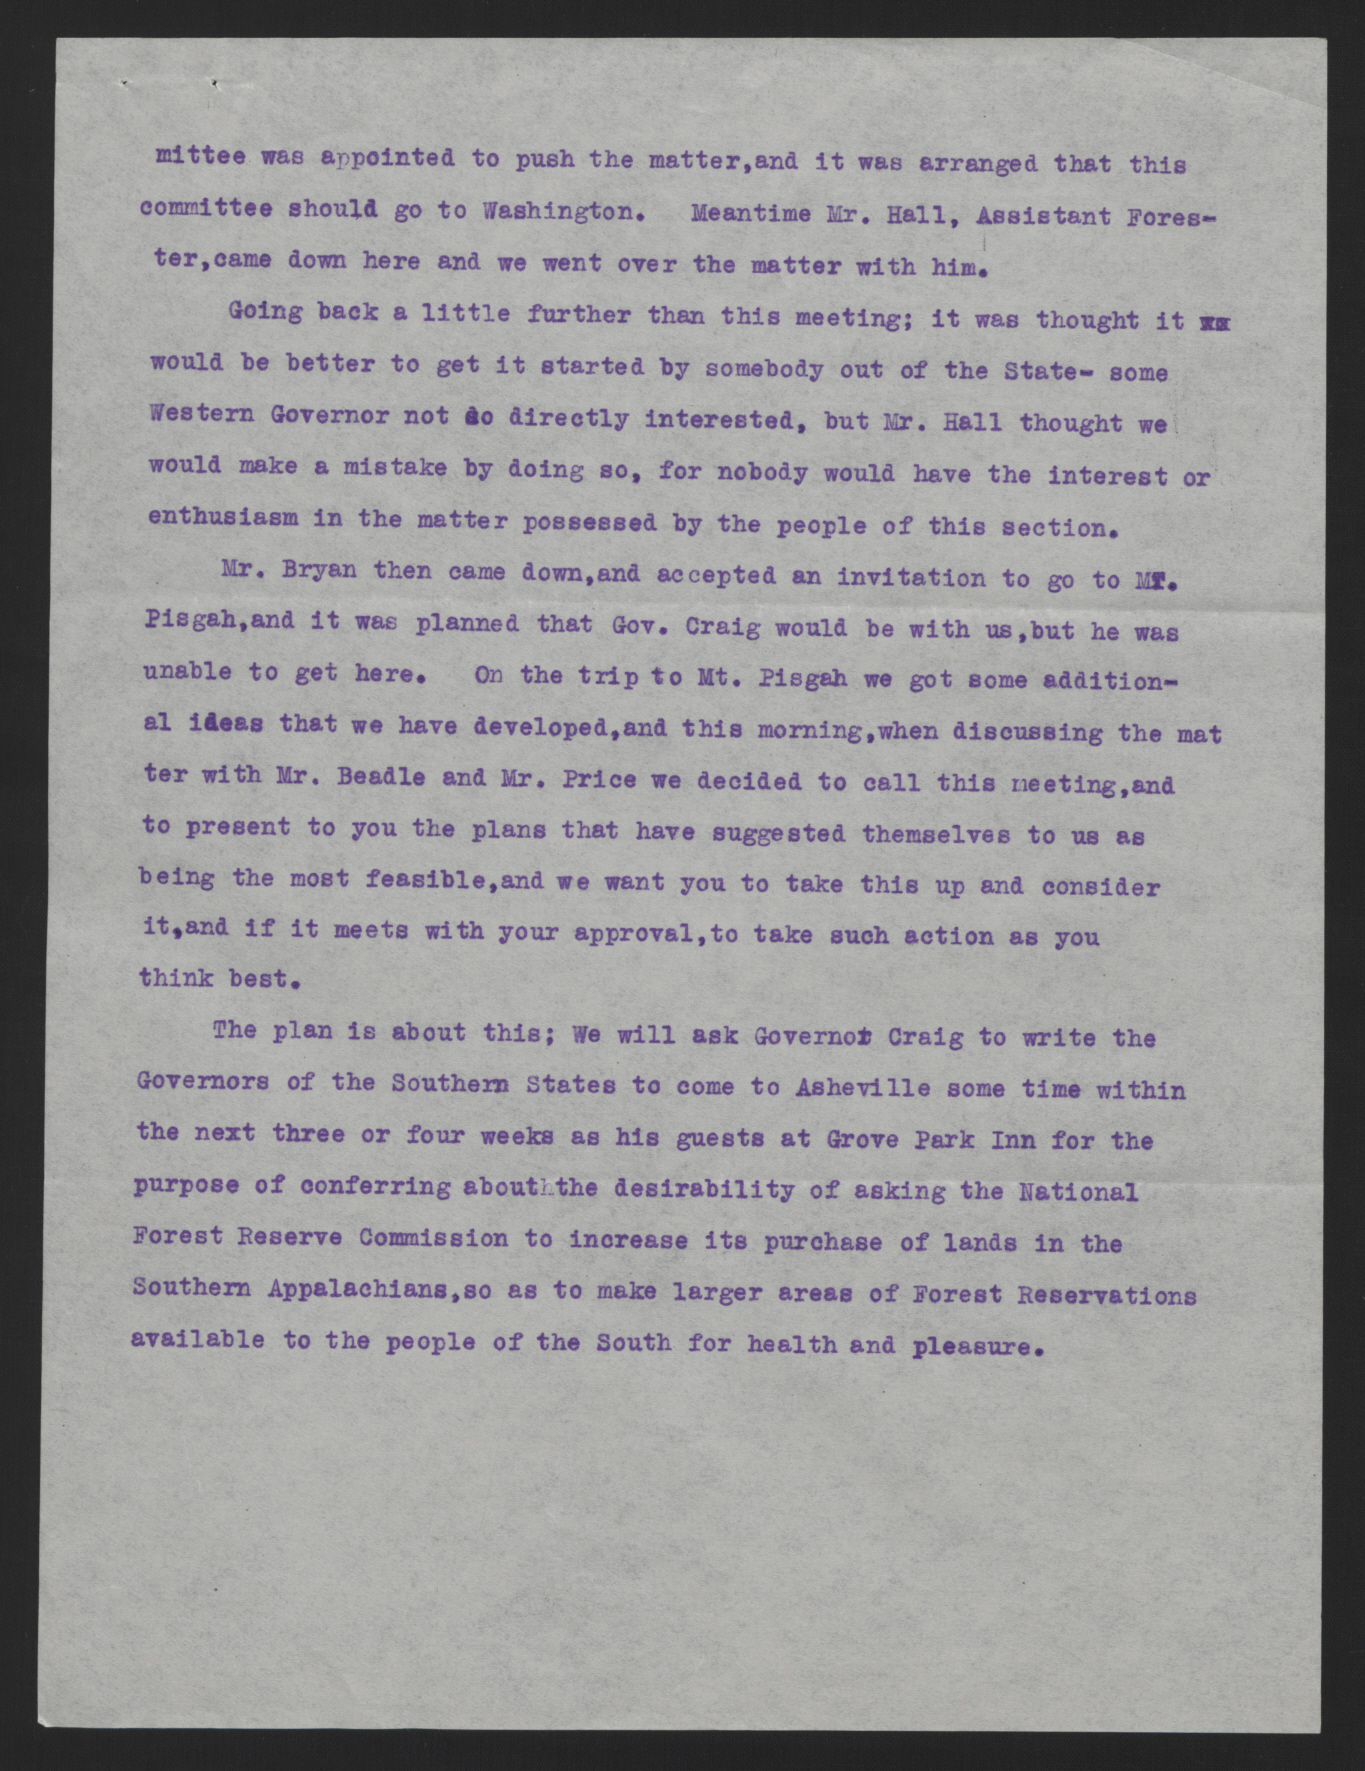 Meeting Minutes of the Greater Western North Carolina Association, 11 October 1913, page 2